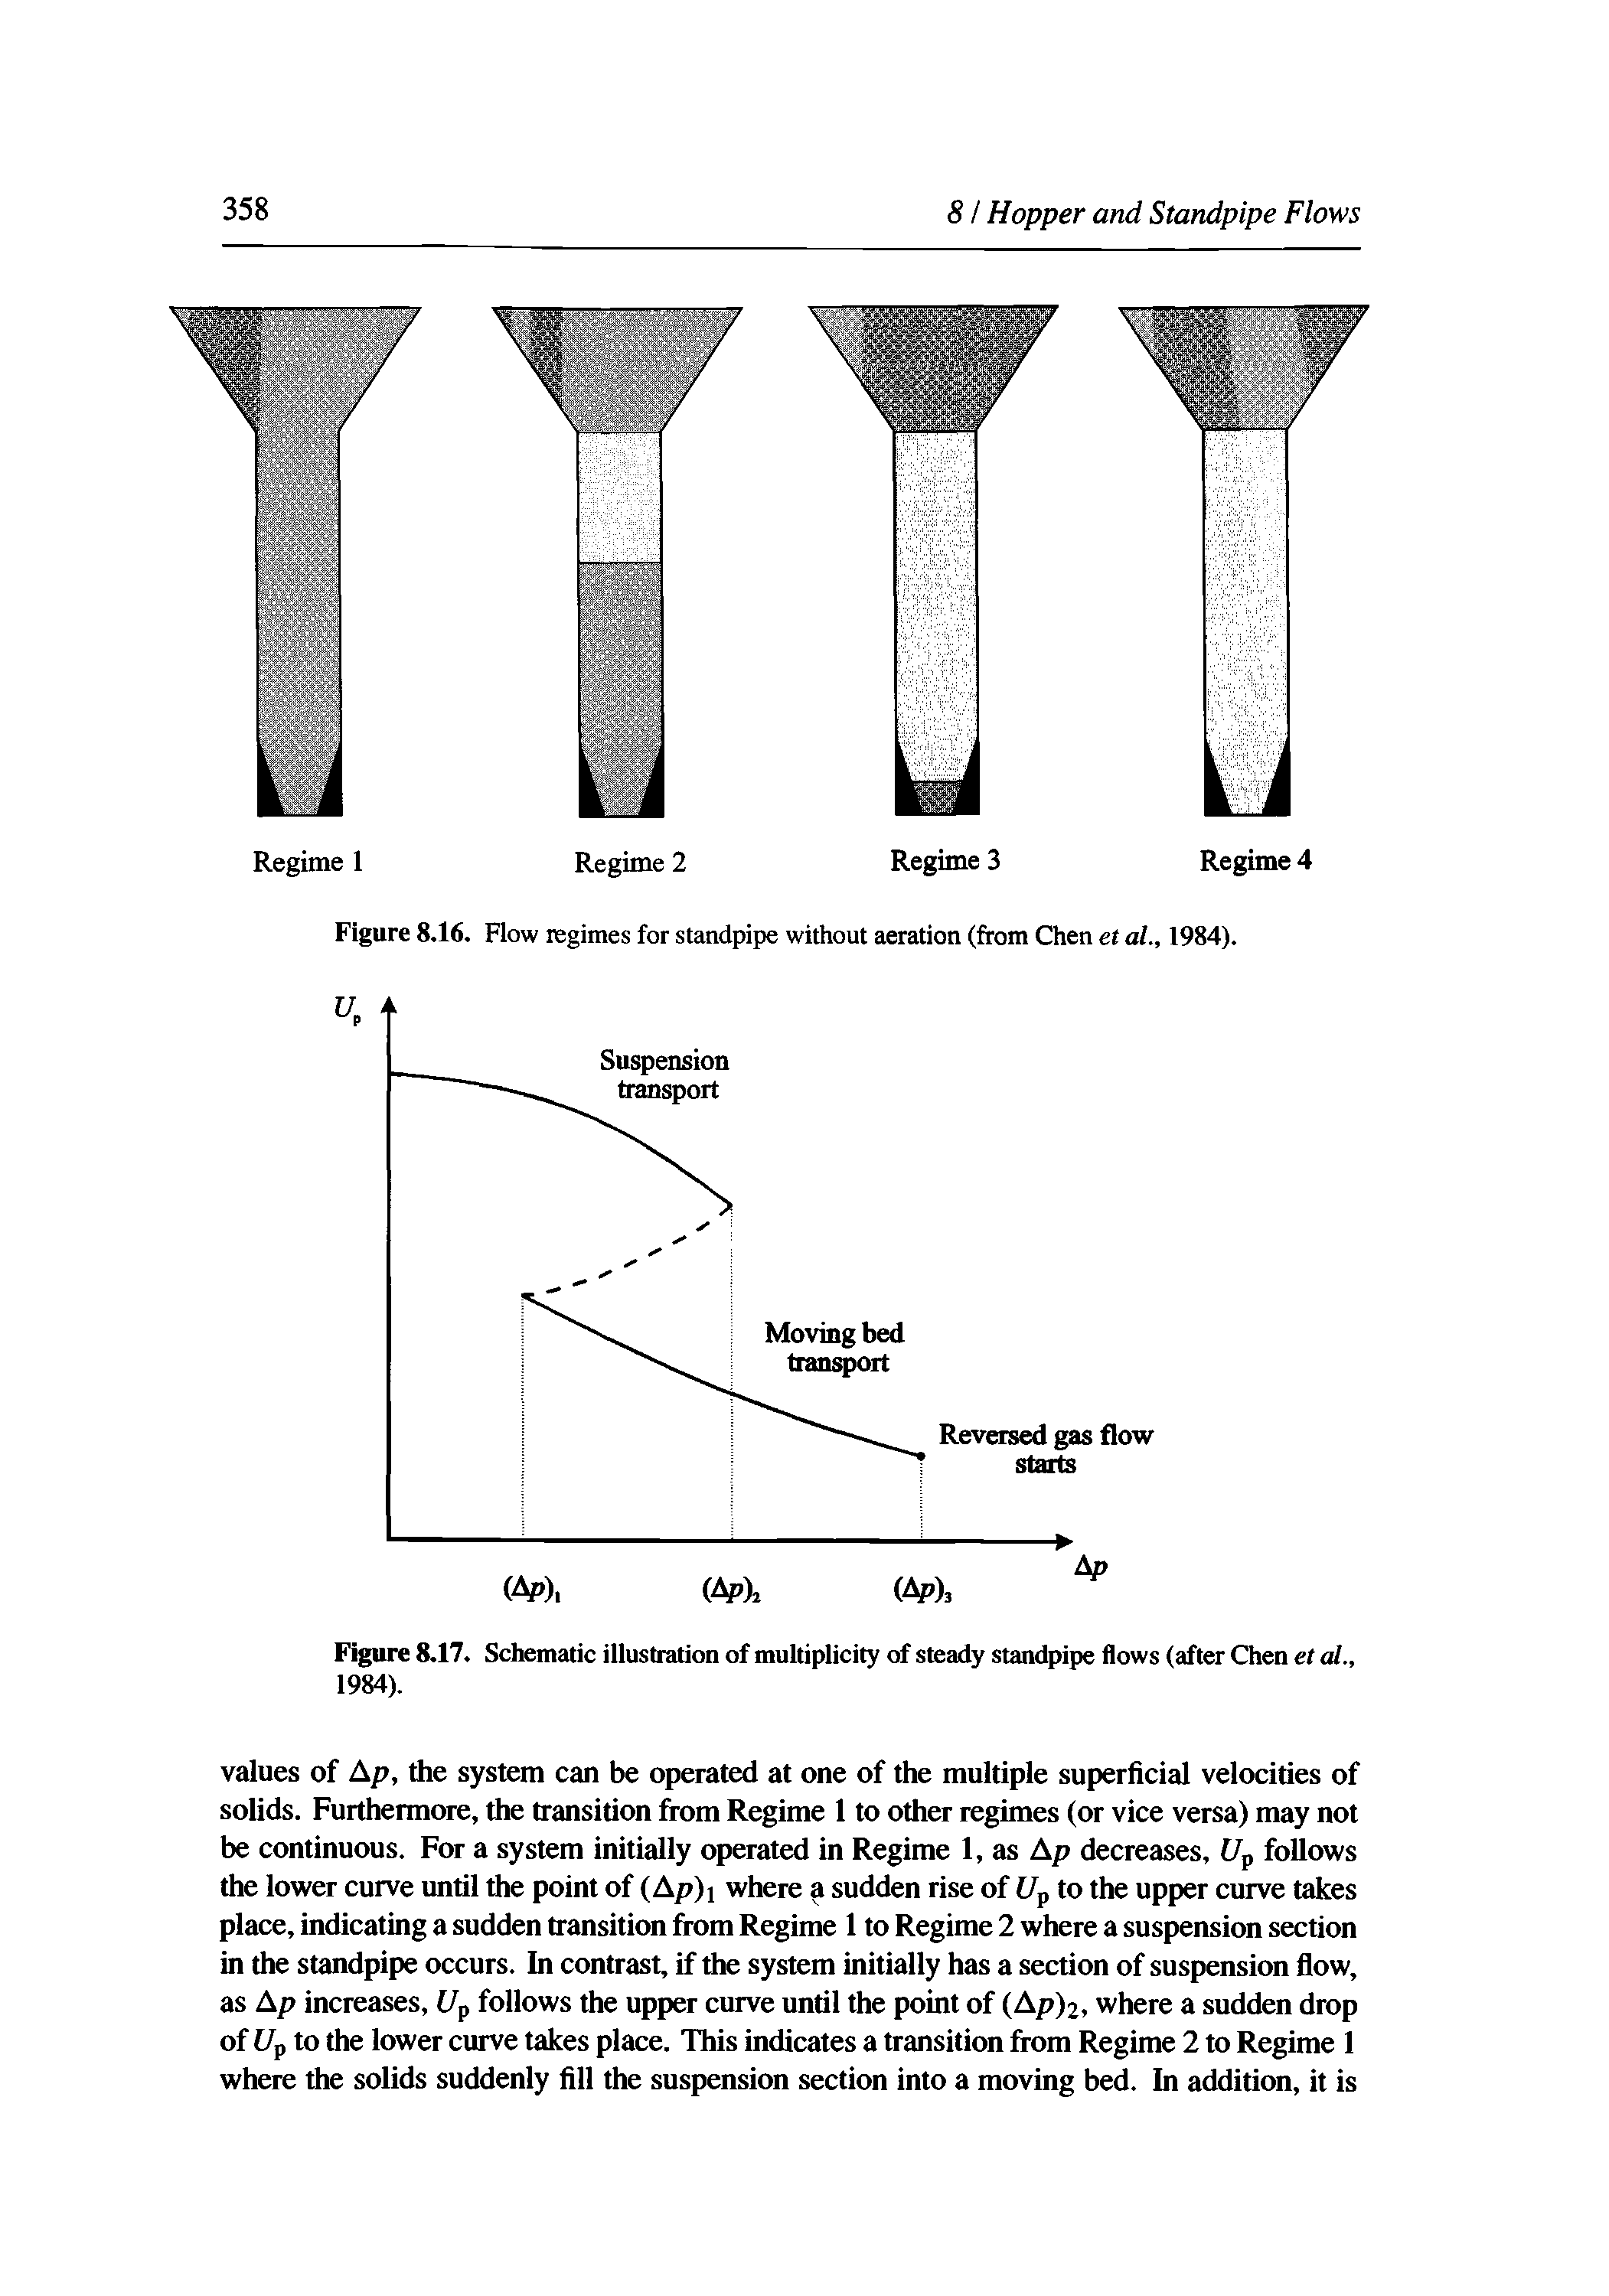 Figure 8.17. Schematic illustration of multiplicity of steady standpipe flows (after Chen et al., 1984).